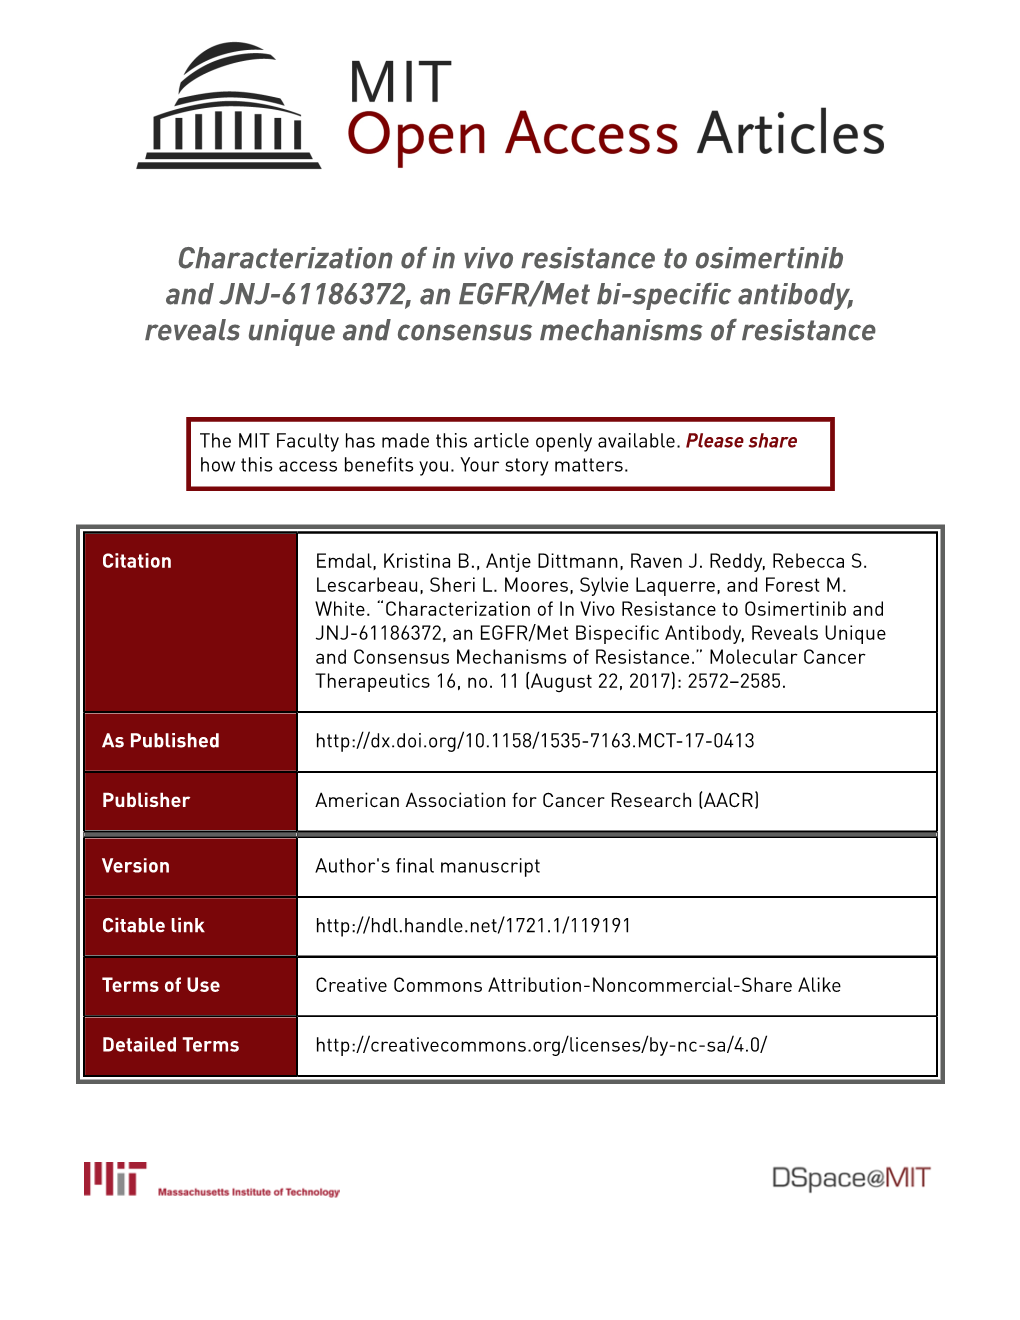 Characterization of in Vivo Resistance to Osimertinib and JNJ-61186372, an EGFR/Met Bi-Specific Antibody, Reveals Unique and Consensus Mechanisms of Resistance